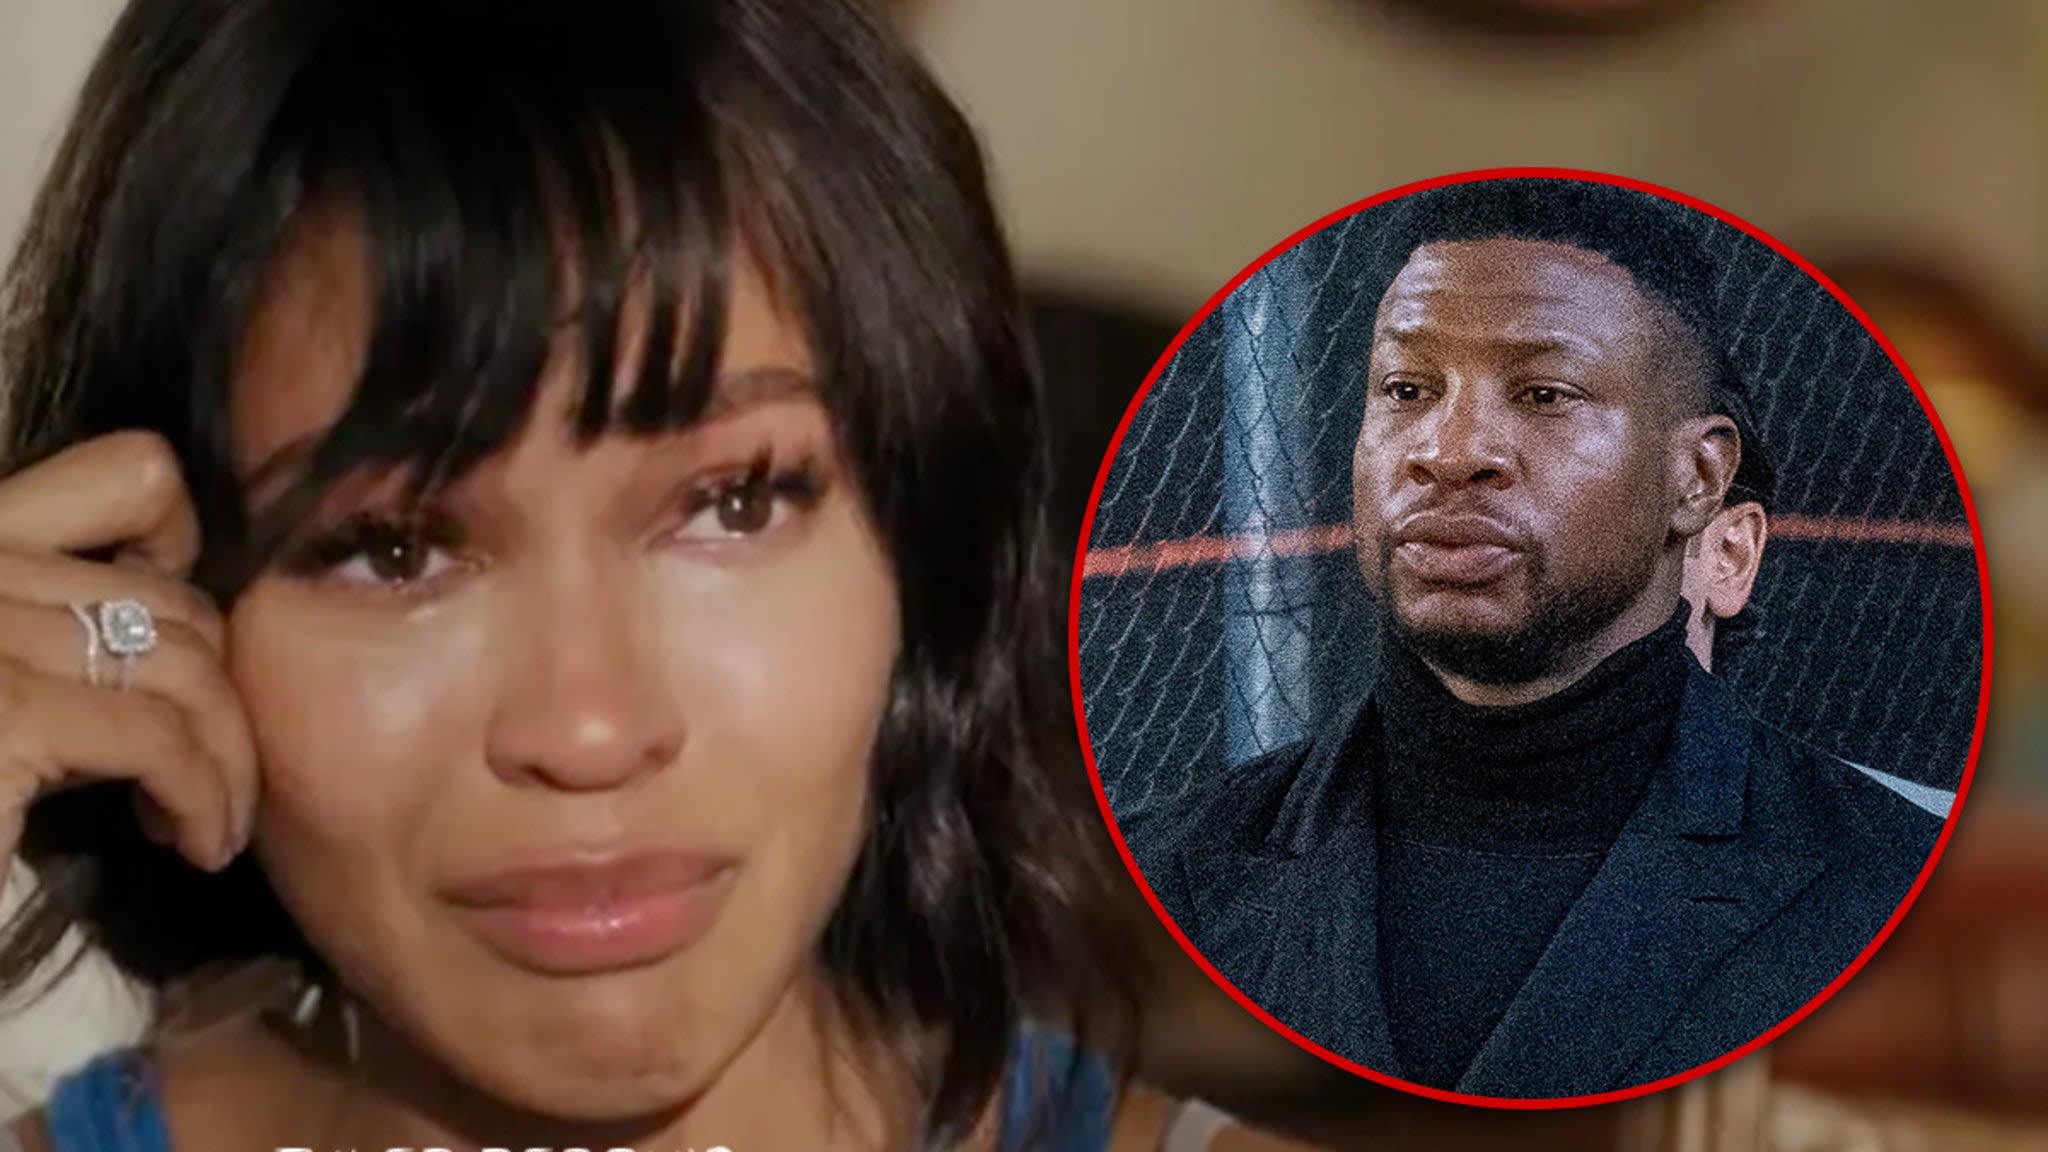 Jonathan Majors' Girlfriend Meagan Good in New Movie About Domestic Abuse